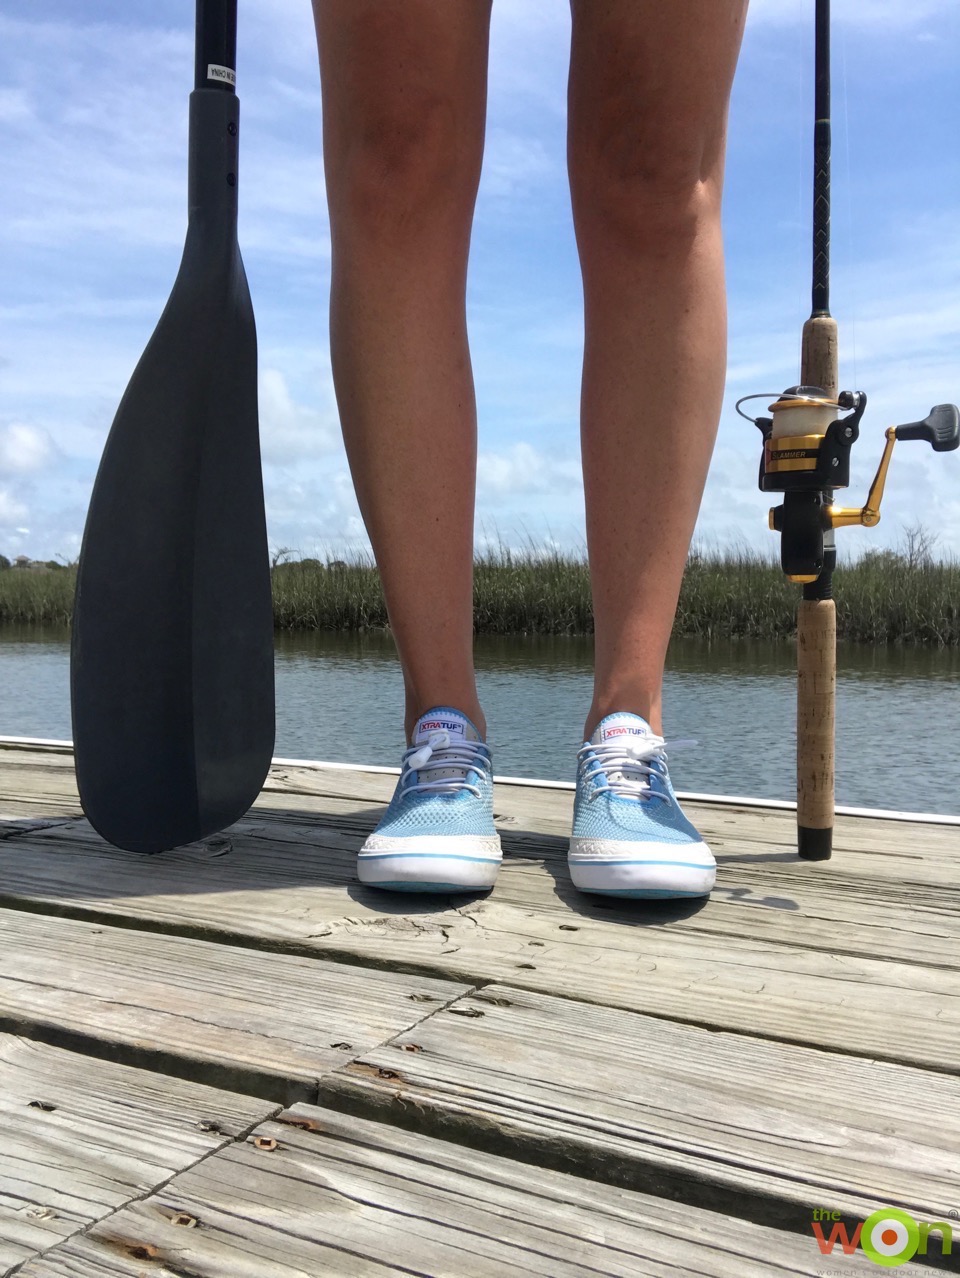 women's paddle board shoes